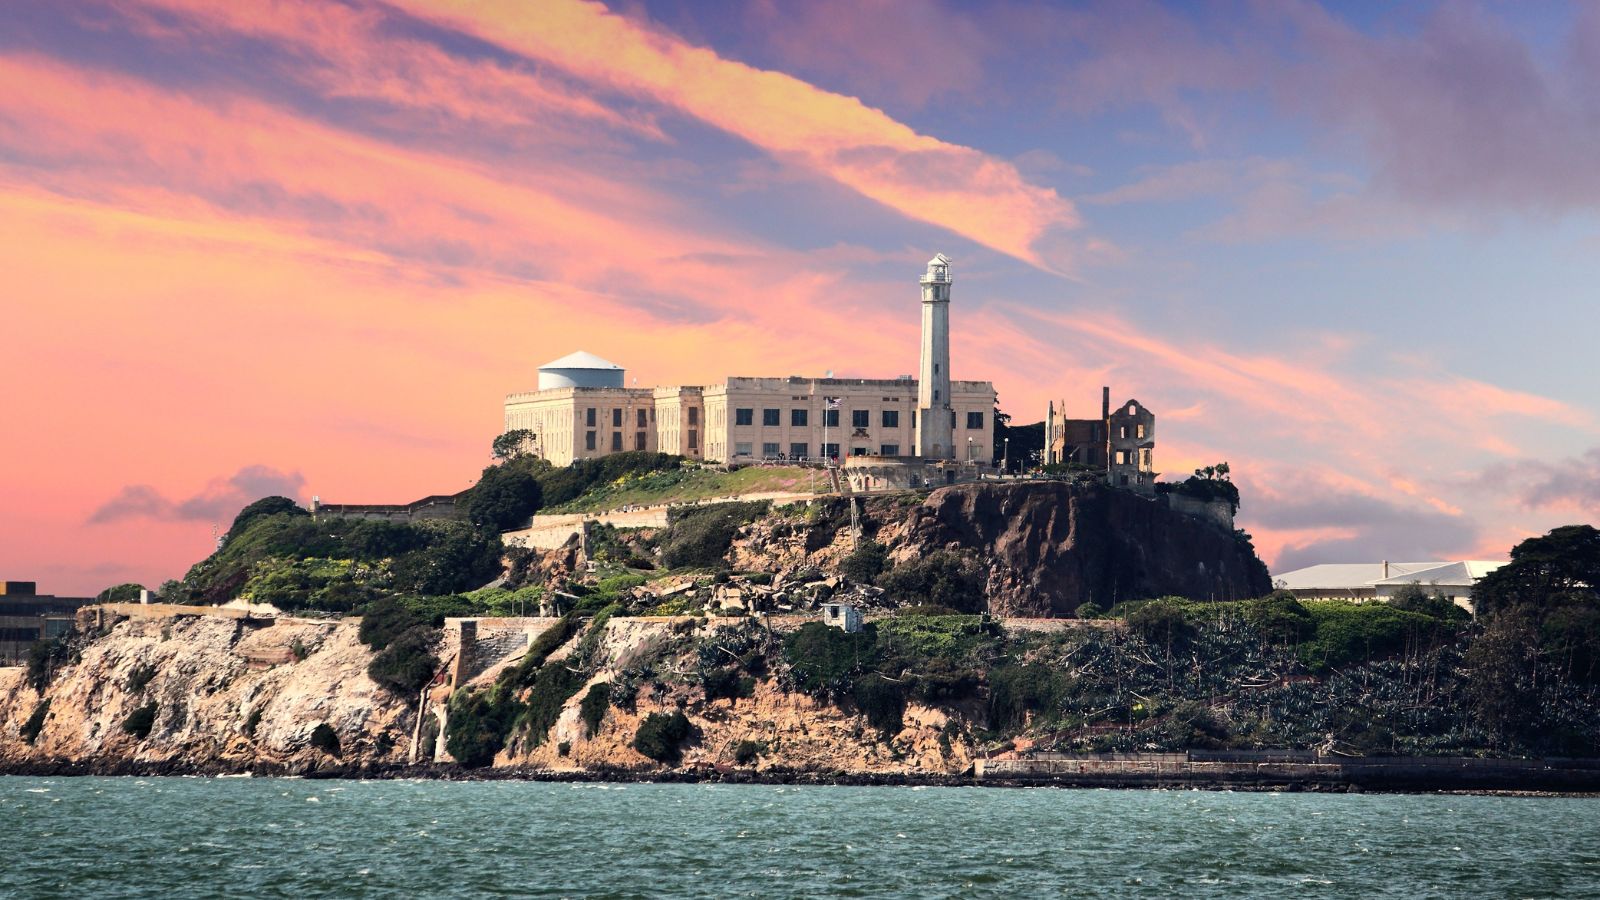 <p>Recommended by 56% of visitors</p><p>Alcatraz, once a federal penitentiary housing notorious convicts, is now a popular attraction in the Golden Gate National Recreation Area. Visitors can tour the cell house, view exhibits, and participate in interpretive programs. The island, accessible by ferry, offers self-guided tours with the option to stay as long as desired. The evening tour offers a guided experience and a different perspective of Alcatraz. Whether you prefer to explore independently or seek a more guided experience, Alcatraz promises a unique glimpse into history.</p>